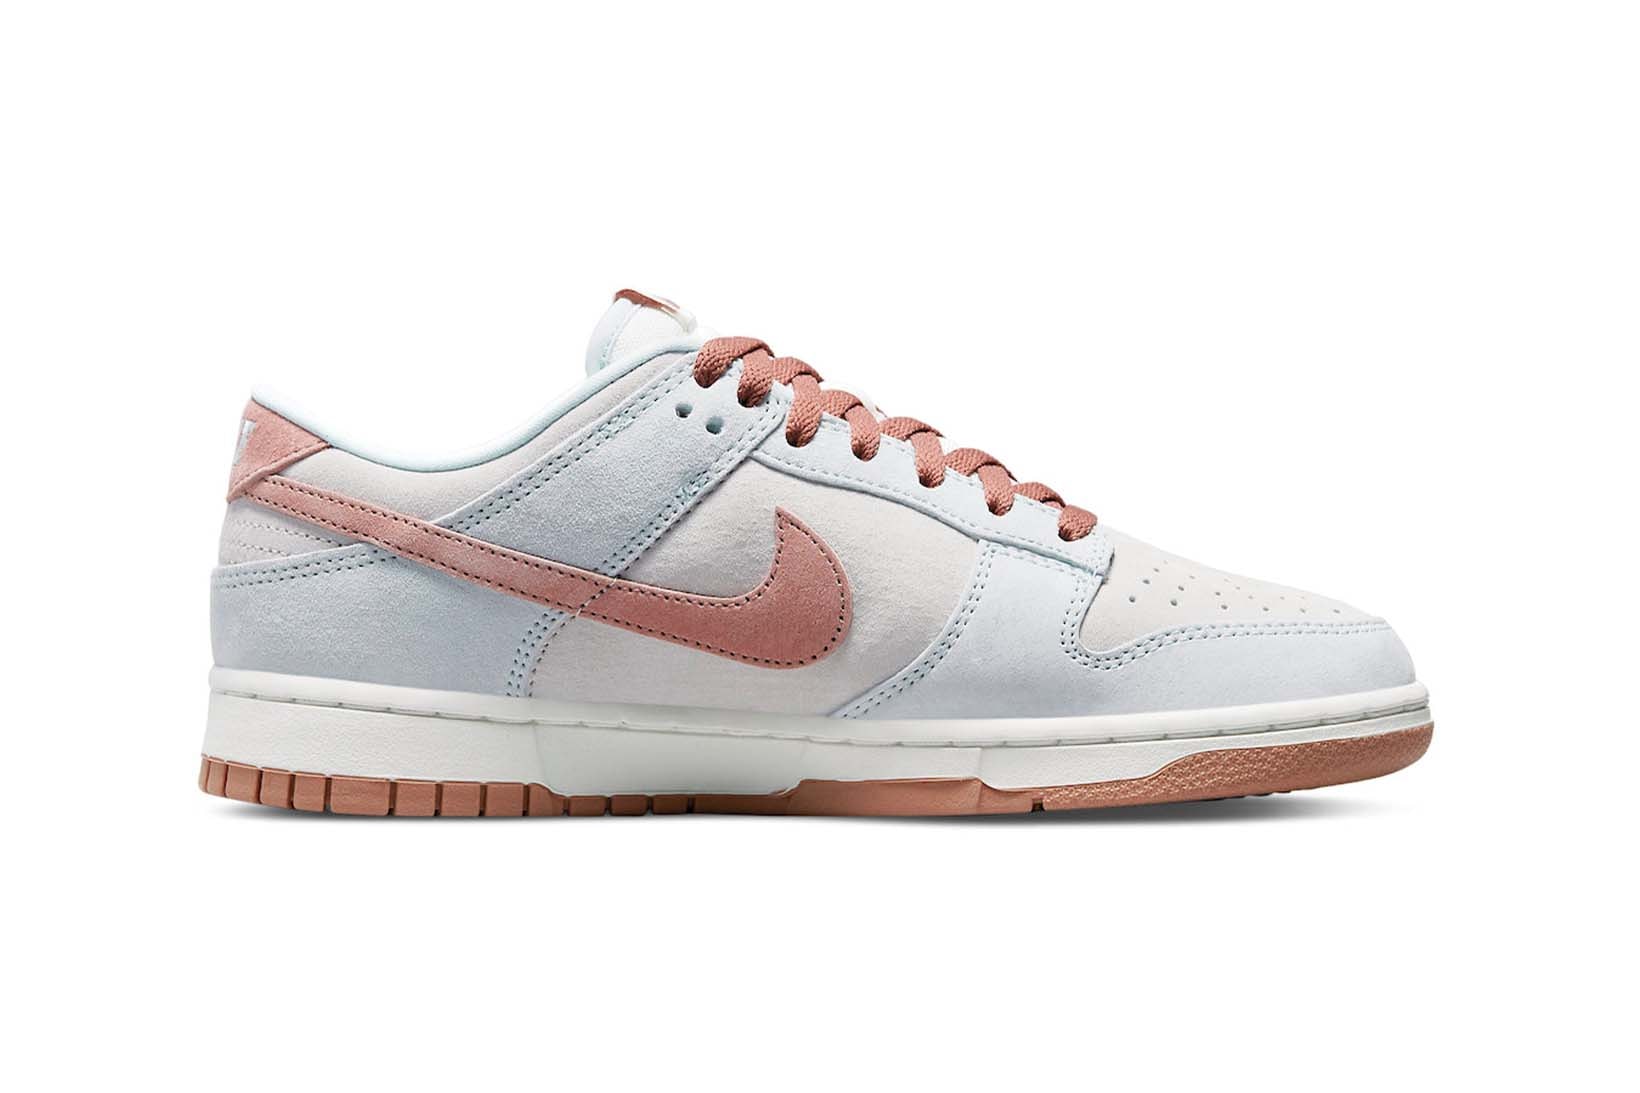 Nike Dunk Low High Fossil Rose Pack Aura Phantom Summit White Price Release Date